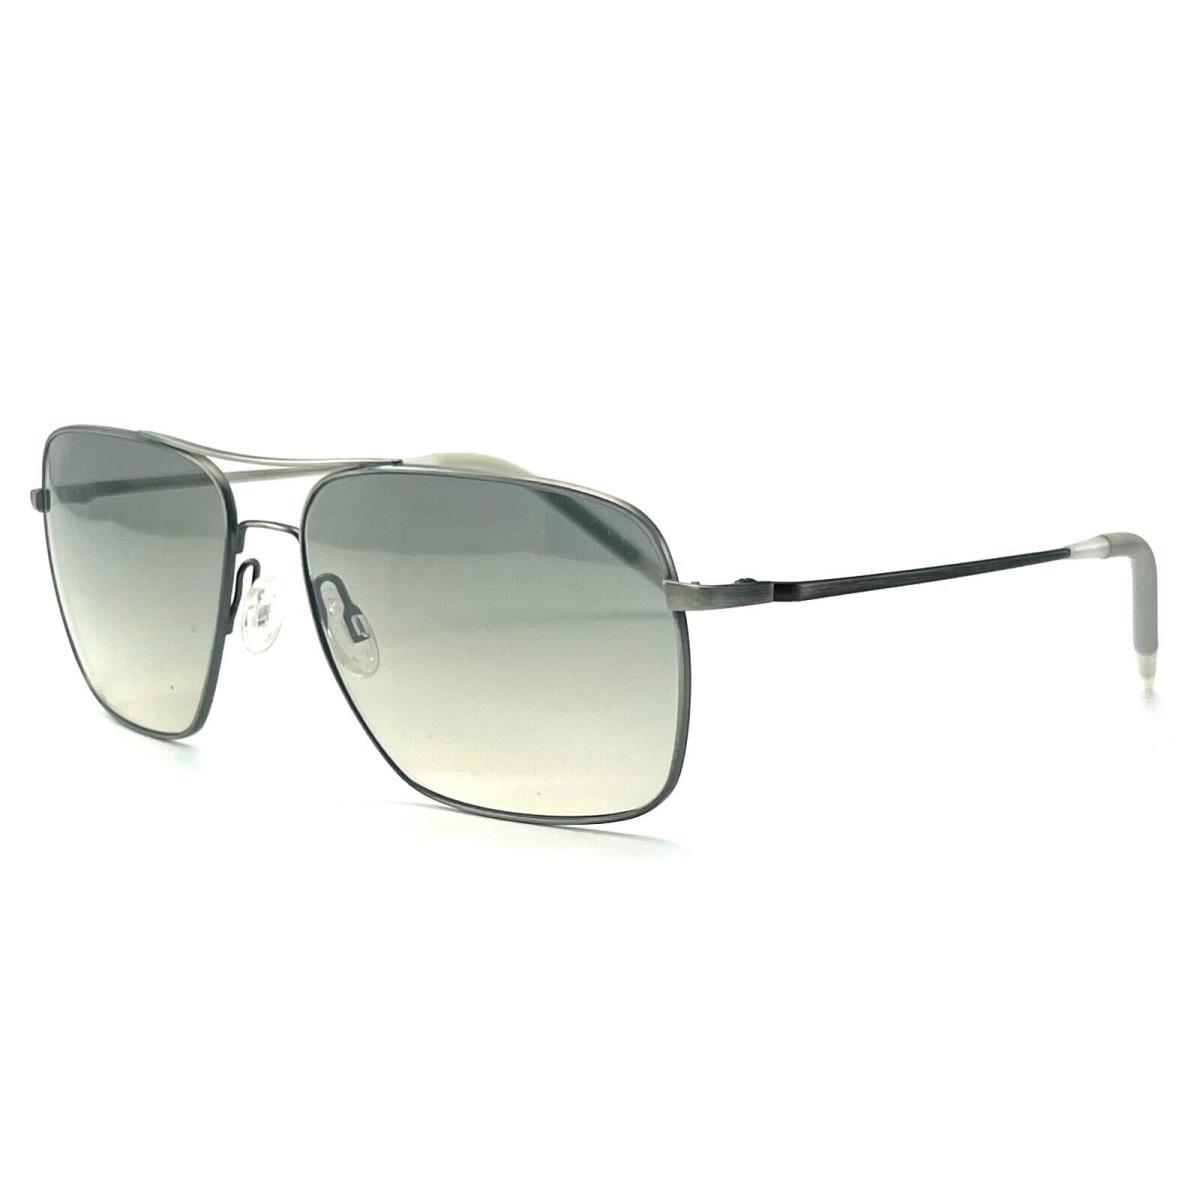 Oliver Peoples Clifton OV1150S 528932 Silver Sunglasses 58-15 140 - Frame: Silver, Lens: Gray